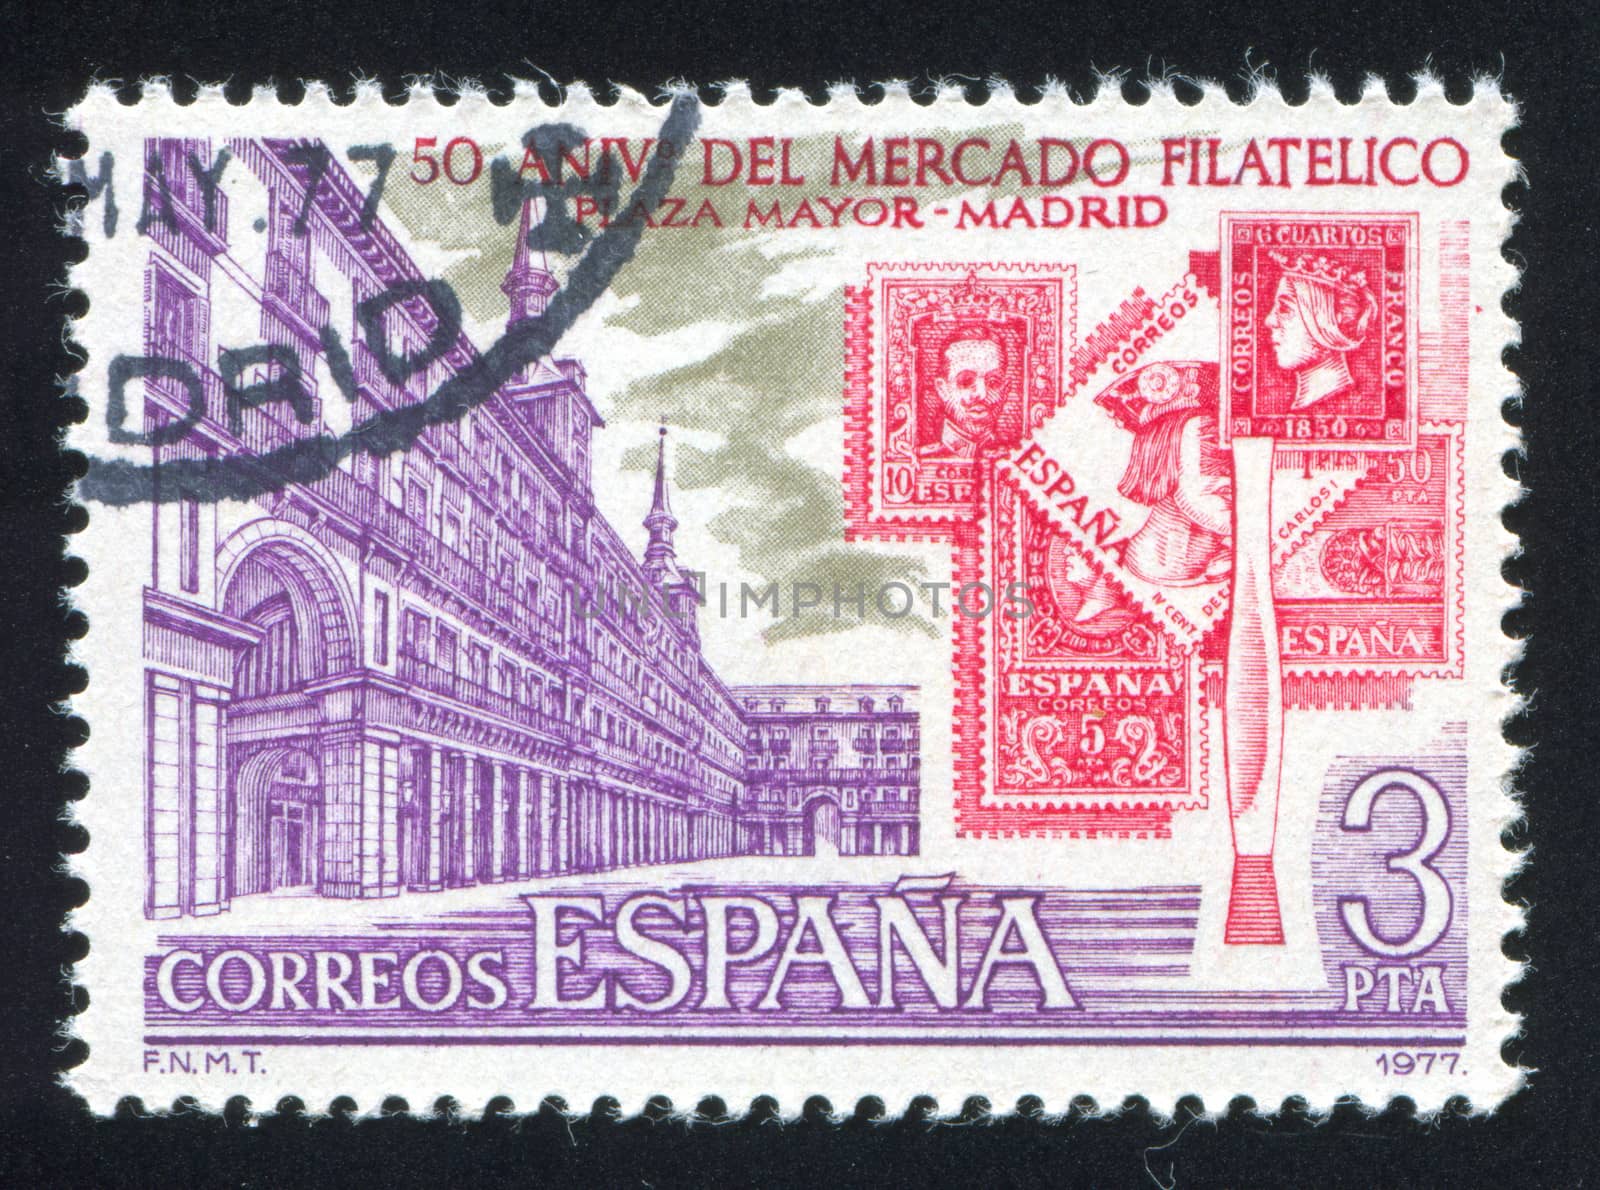 SPAIN - CIRCA 1977: stamp printed by Spain, shows Plaza Mayor and Spanish Stamps, circa 1977